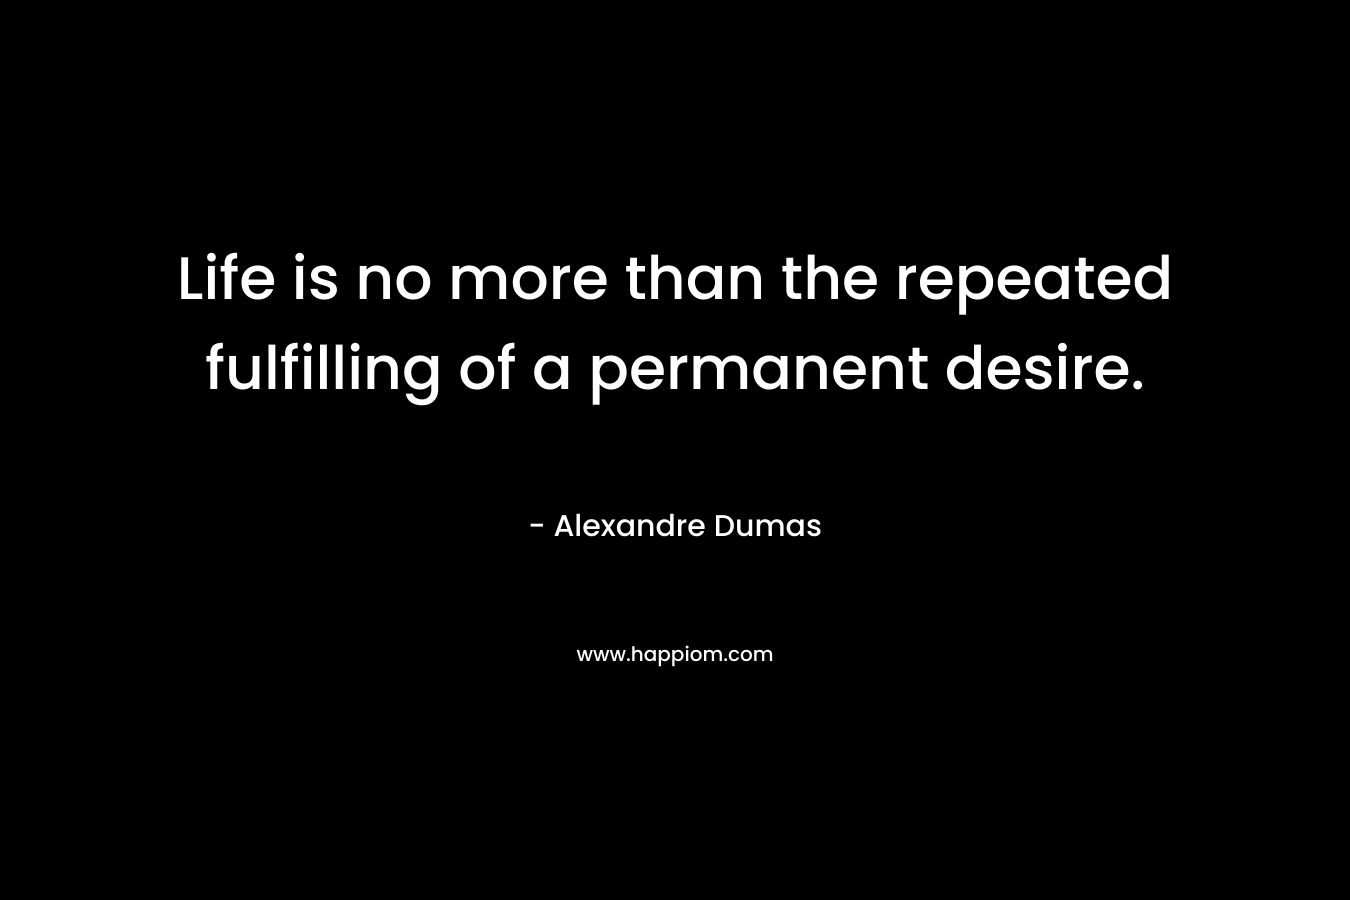 Life is no more than the repeated fulfilling of a permanent desire. – Alexandre Dumas